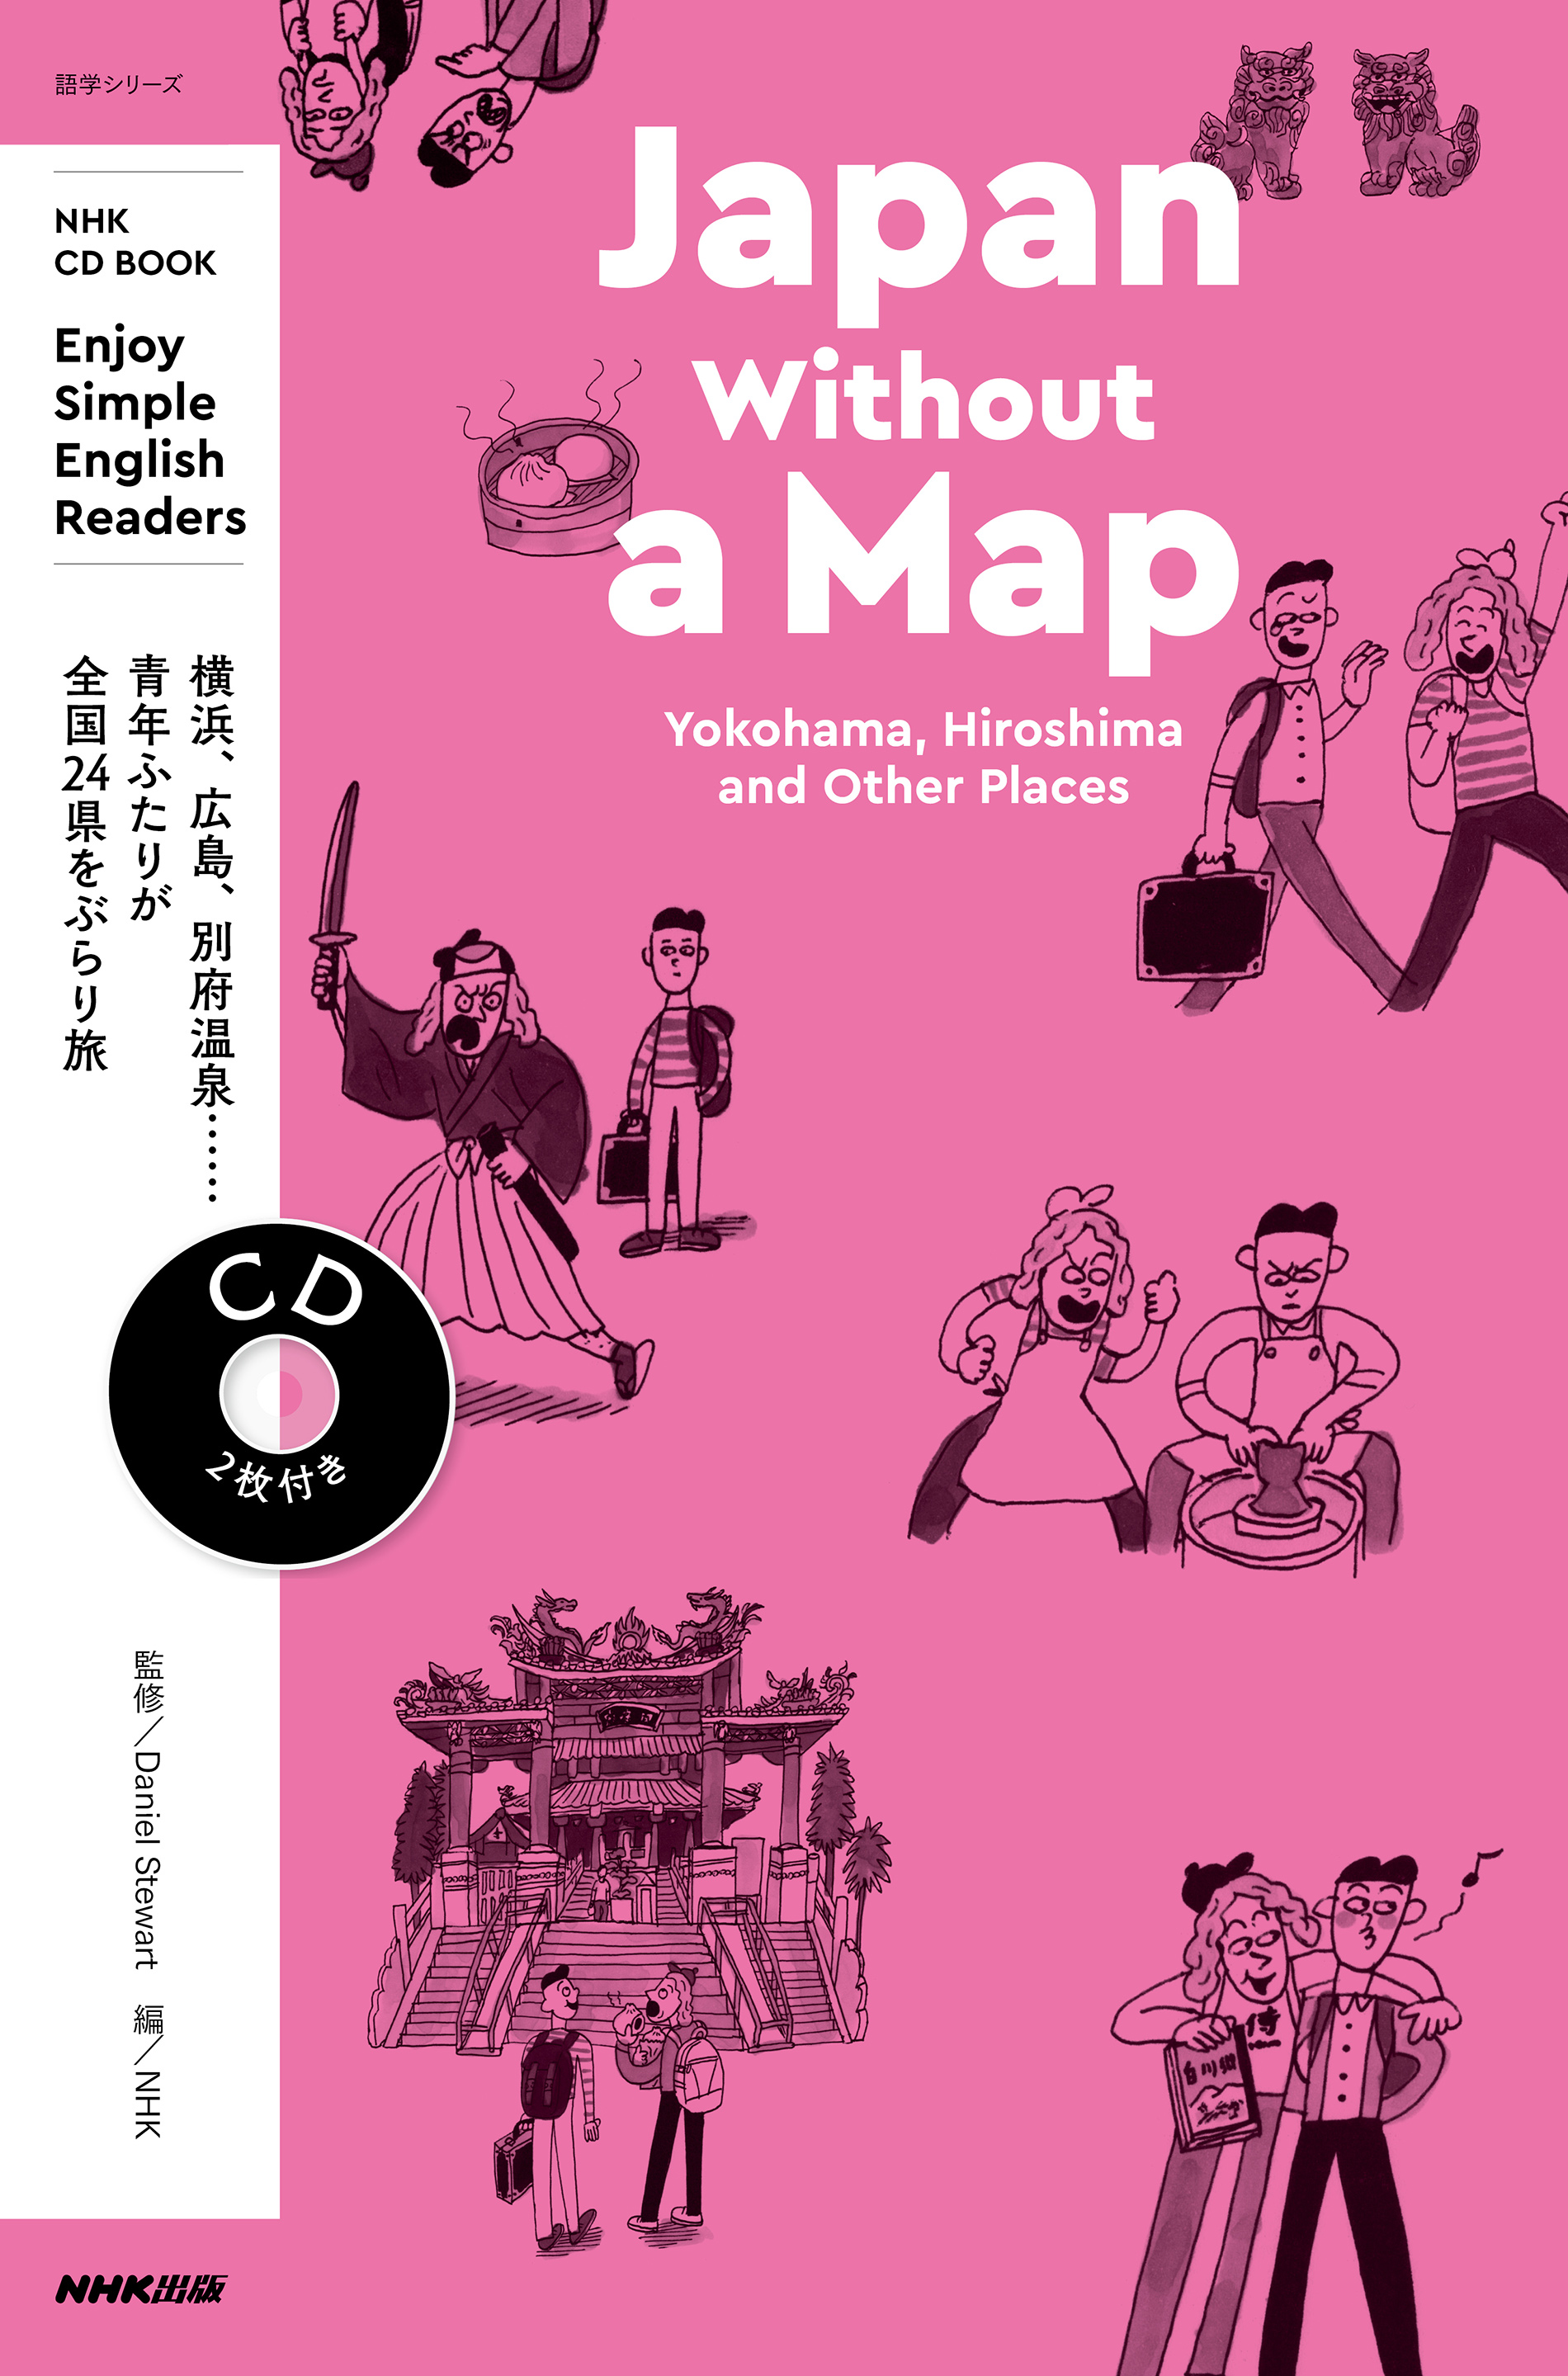 NHK CD BOOK　Enjoy Simple English Readers Japan Without a Mapの商品画像